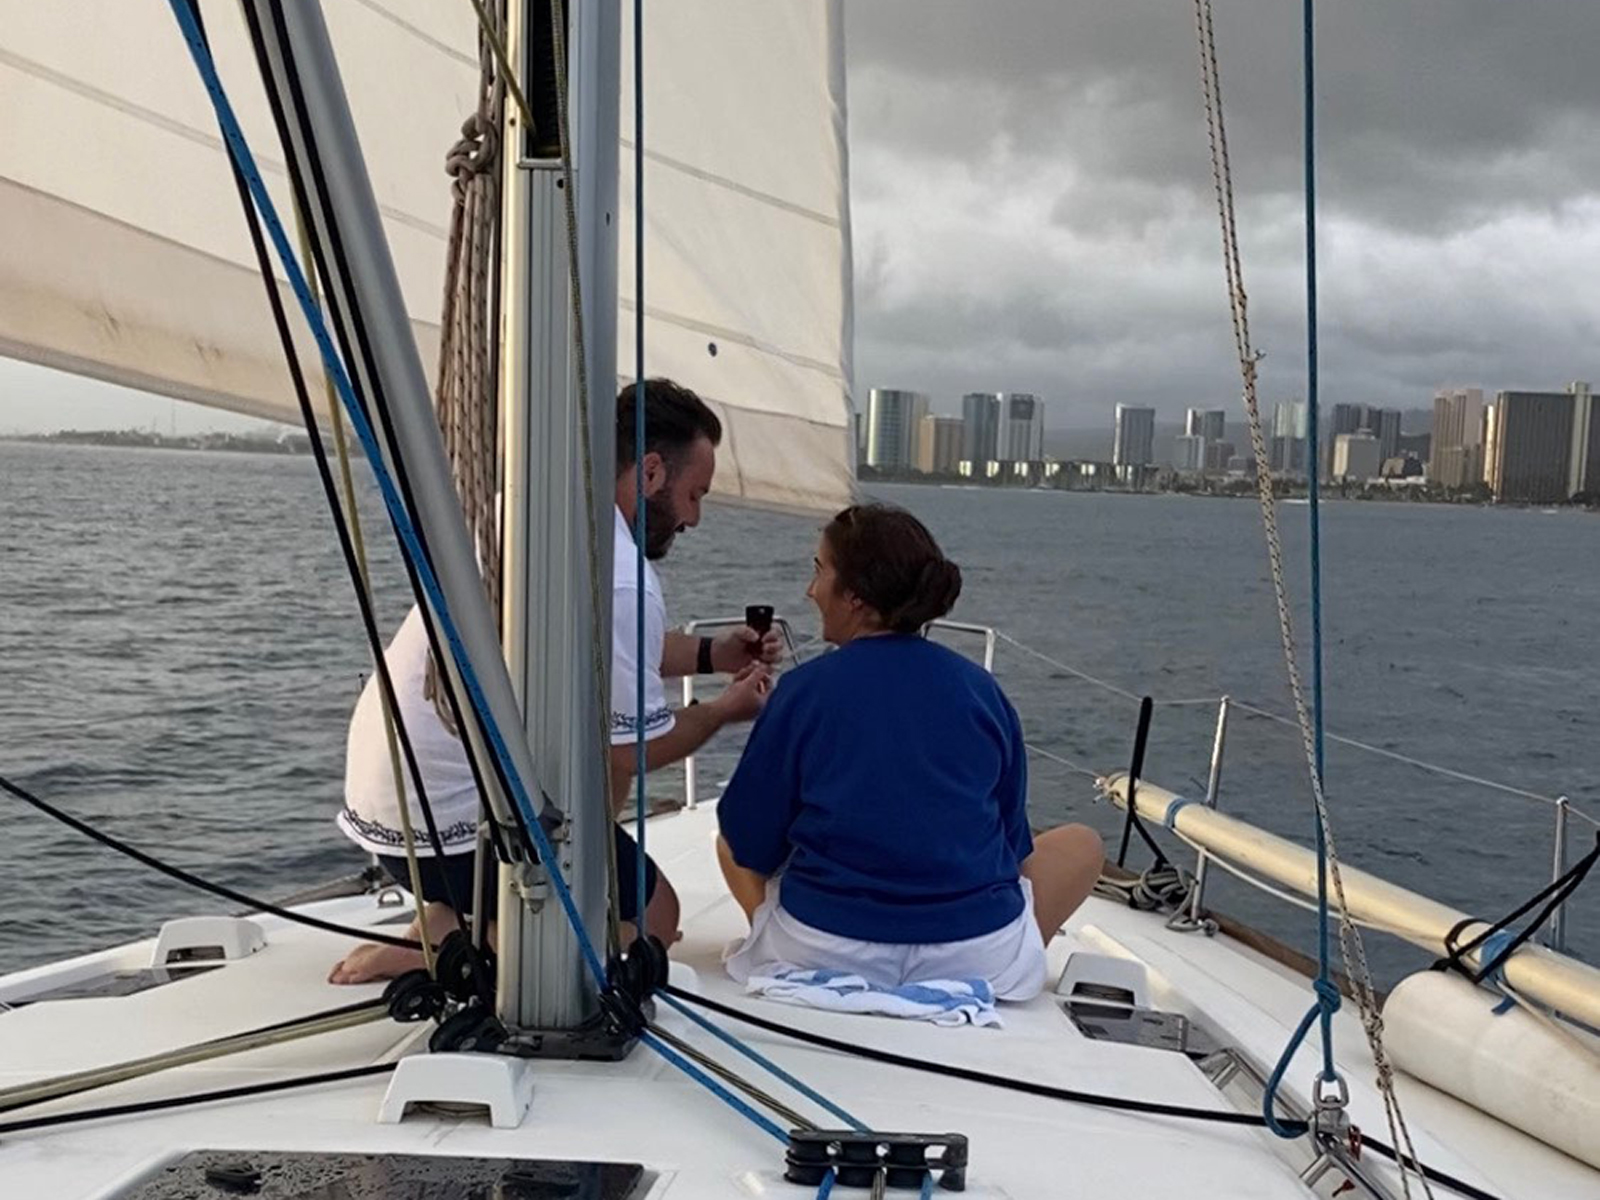 Special Event Tours with Waikiki Sailing Tours